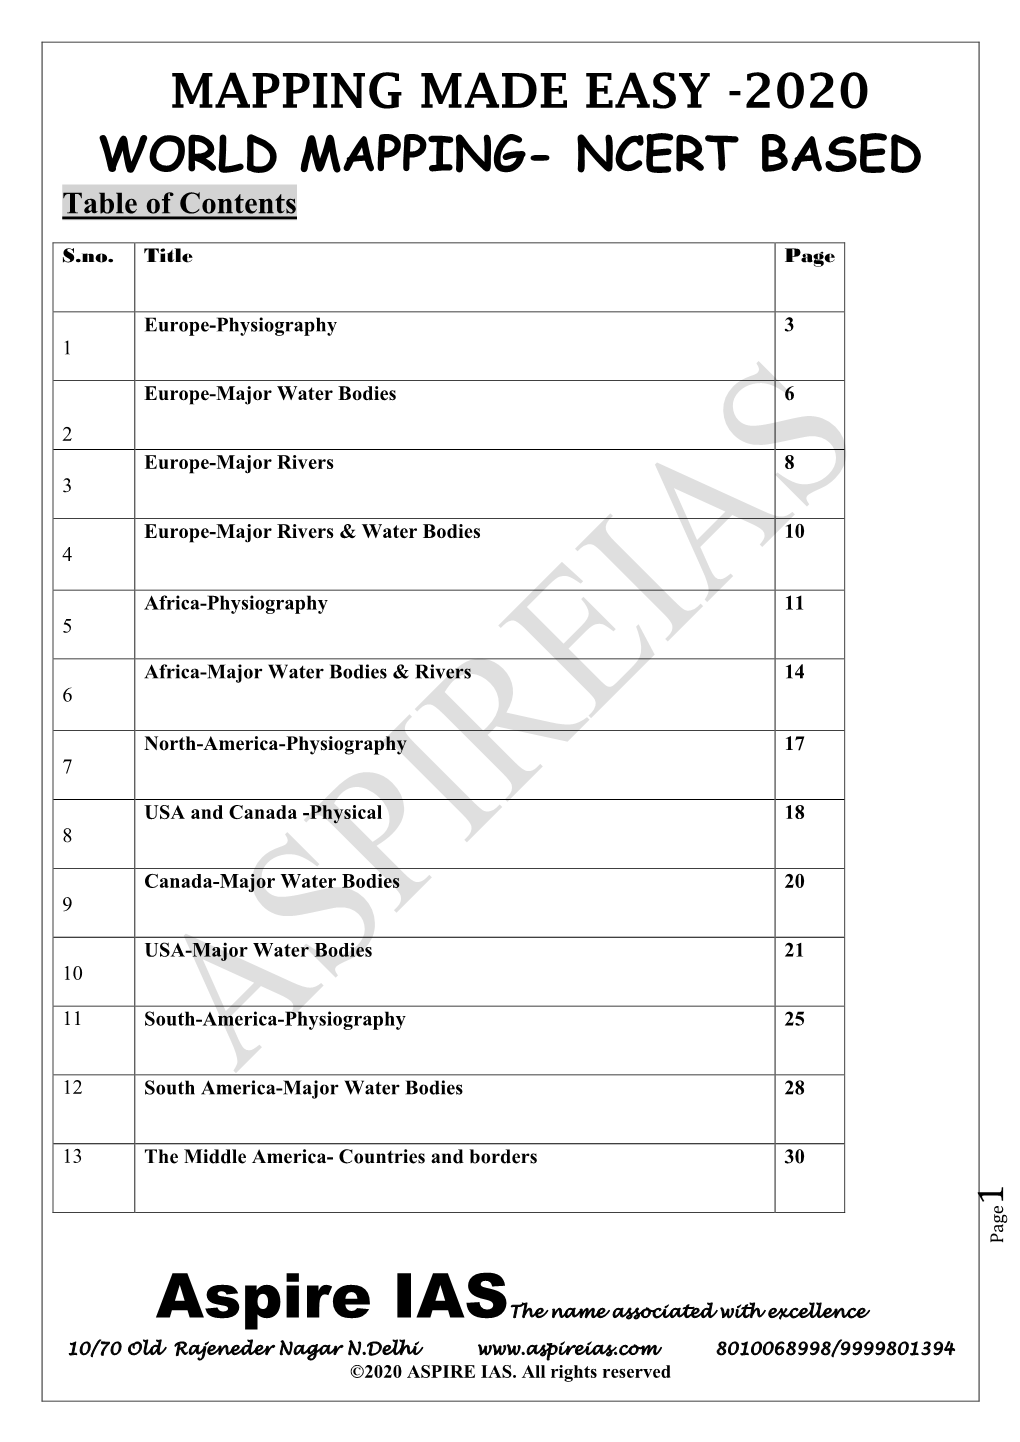 2020 WORLD MAPPING- NCERT BASED Table of Contents